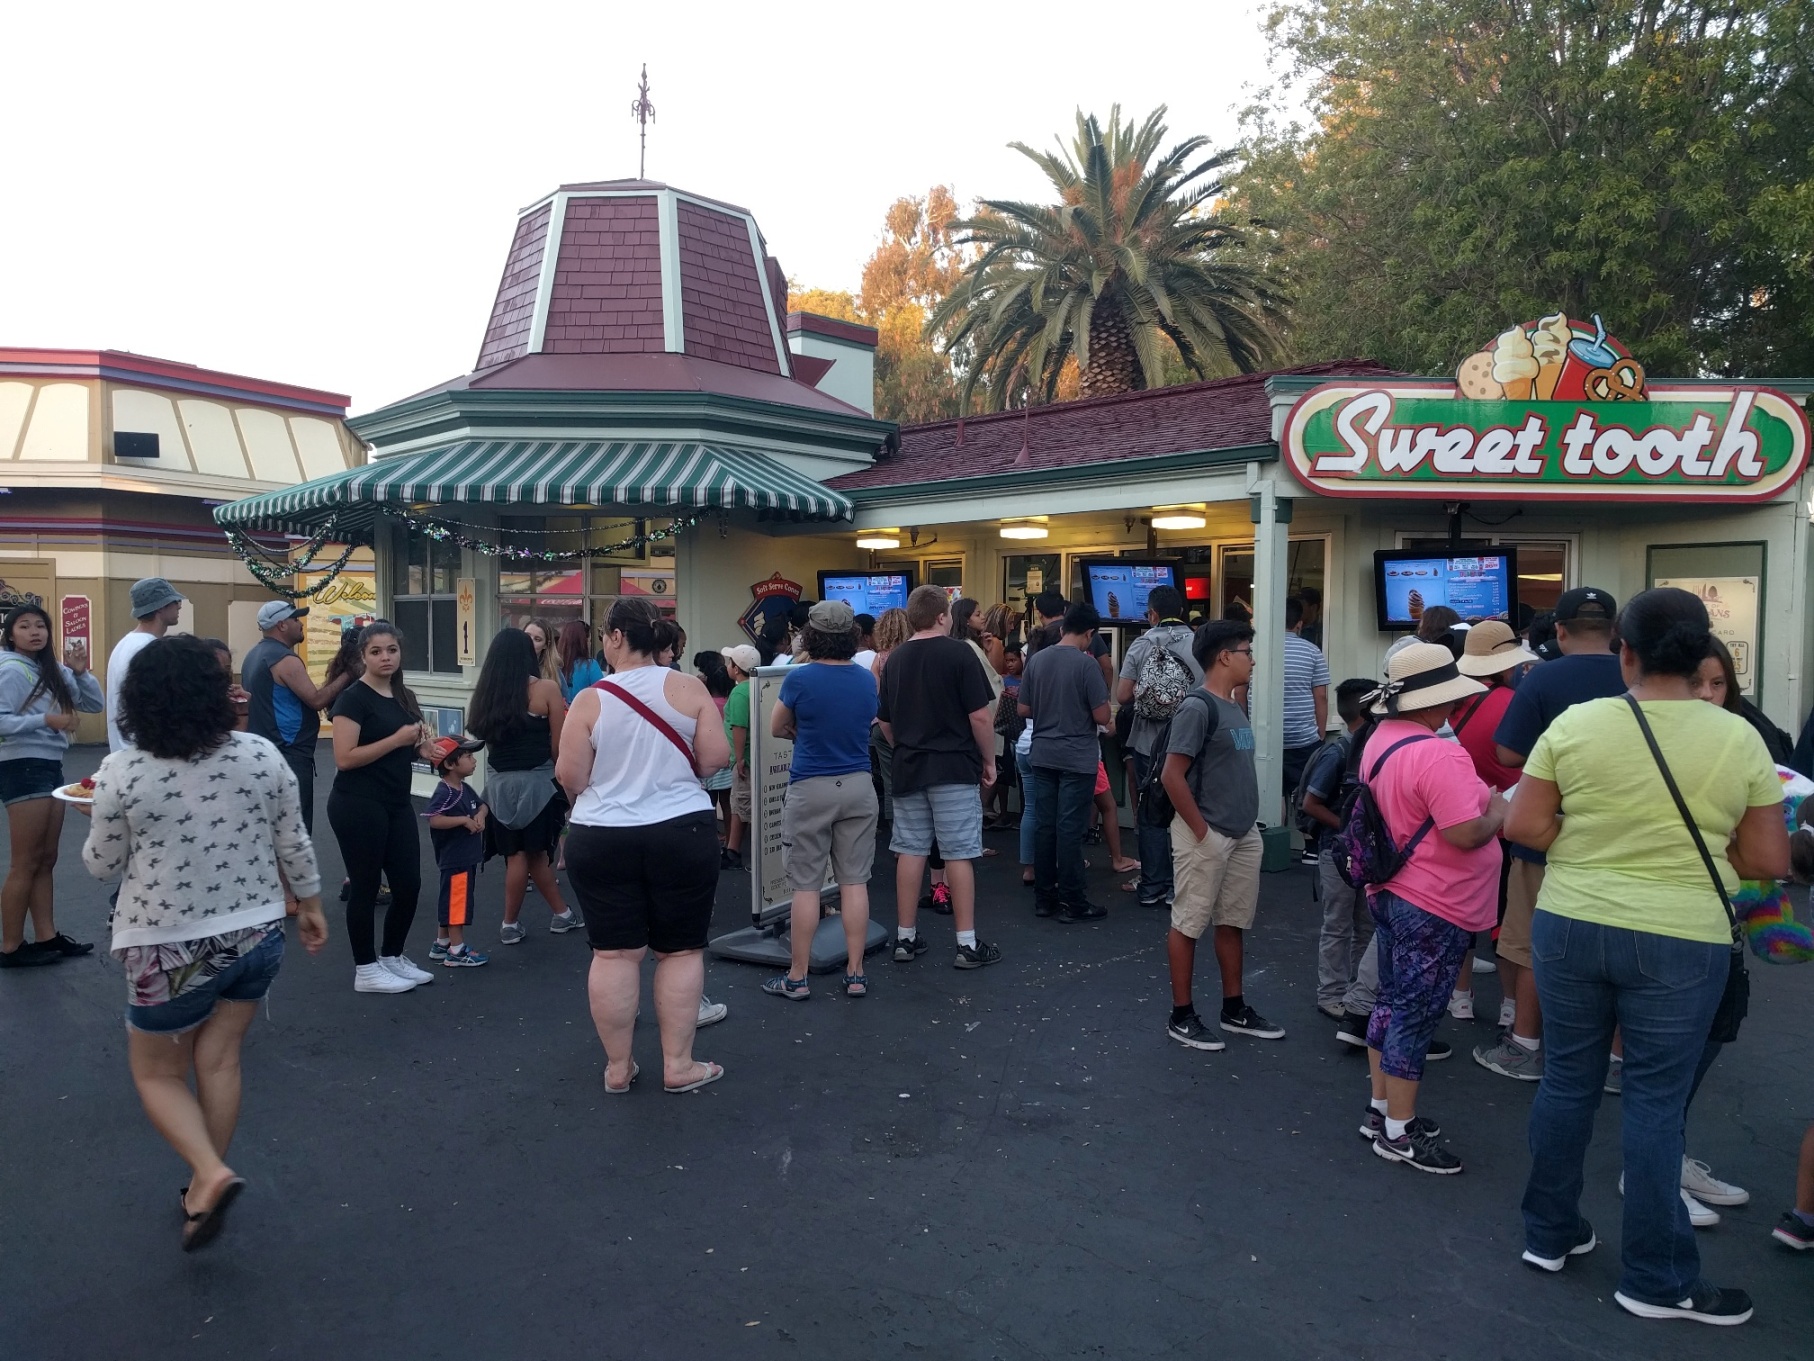 Long lines for funnel cake and beignets.